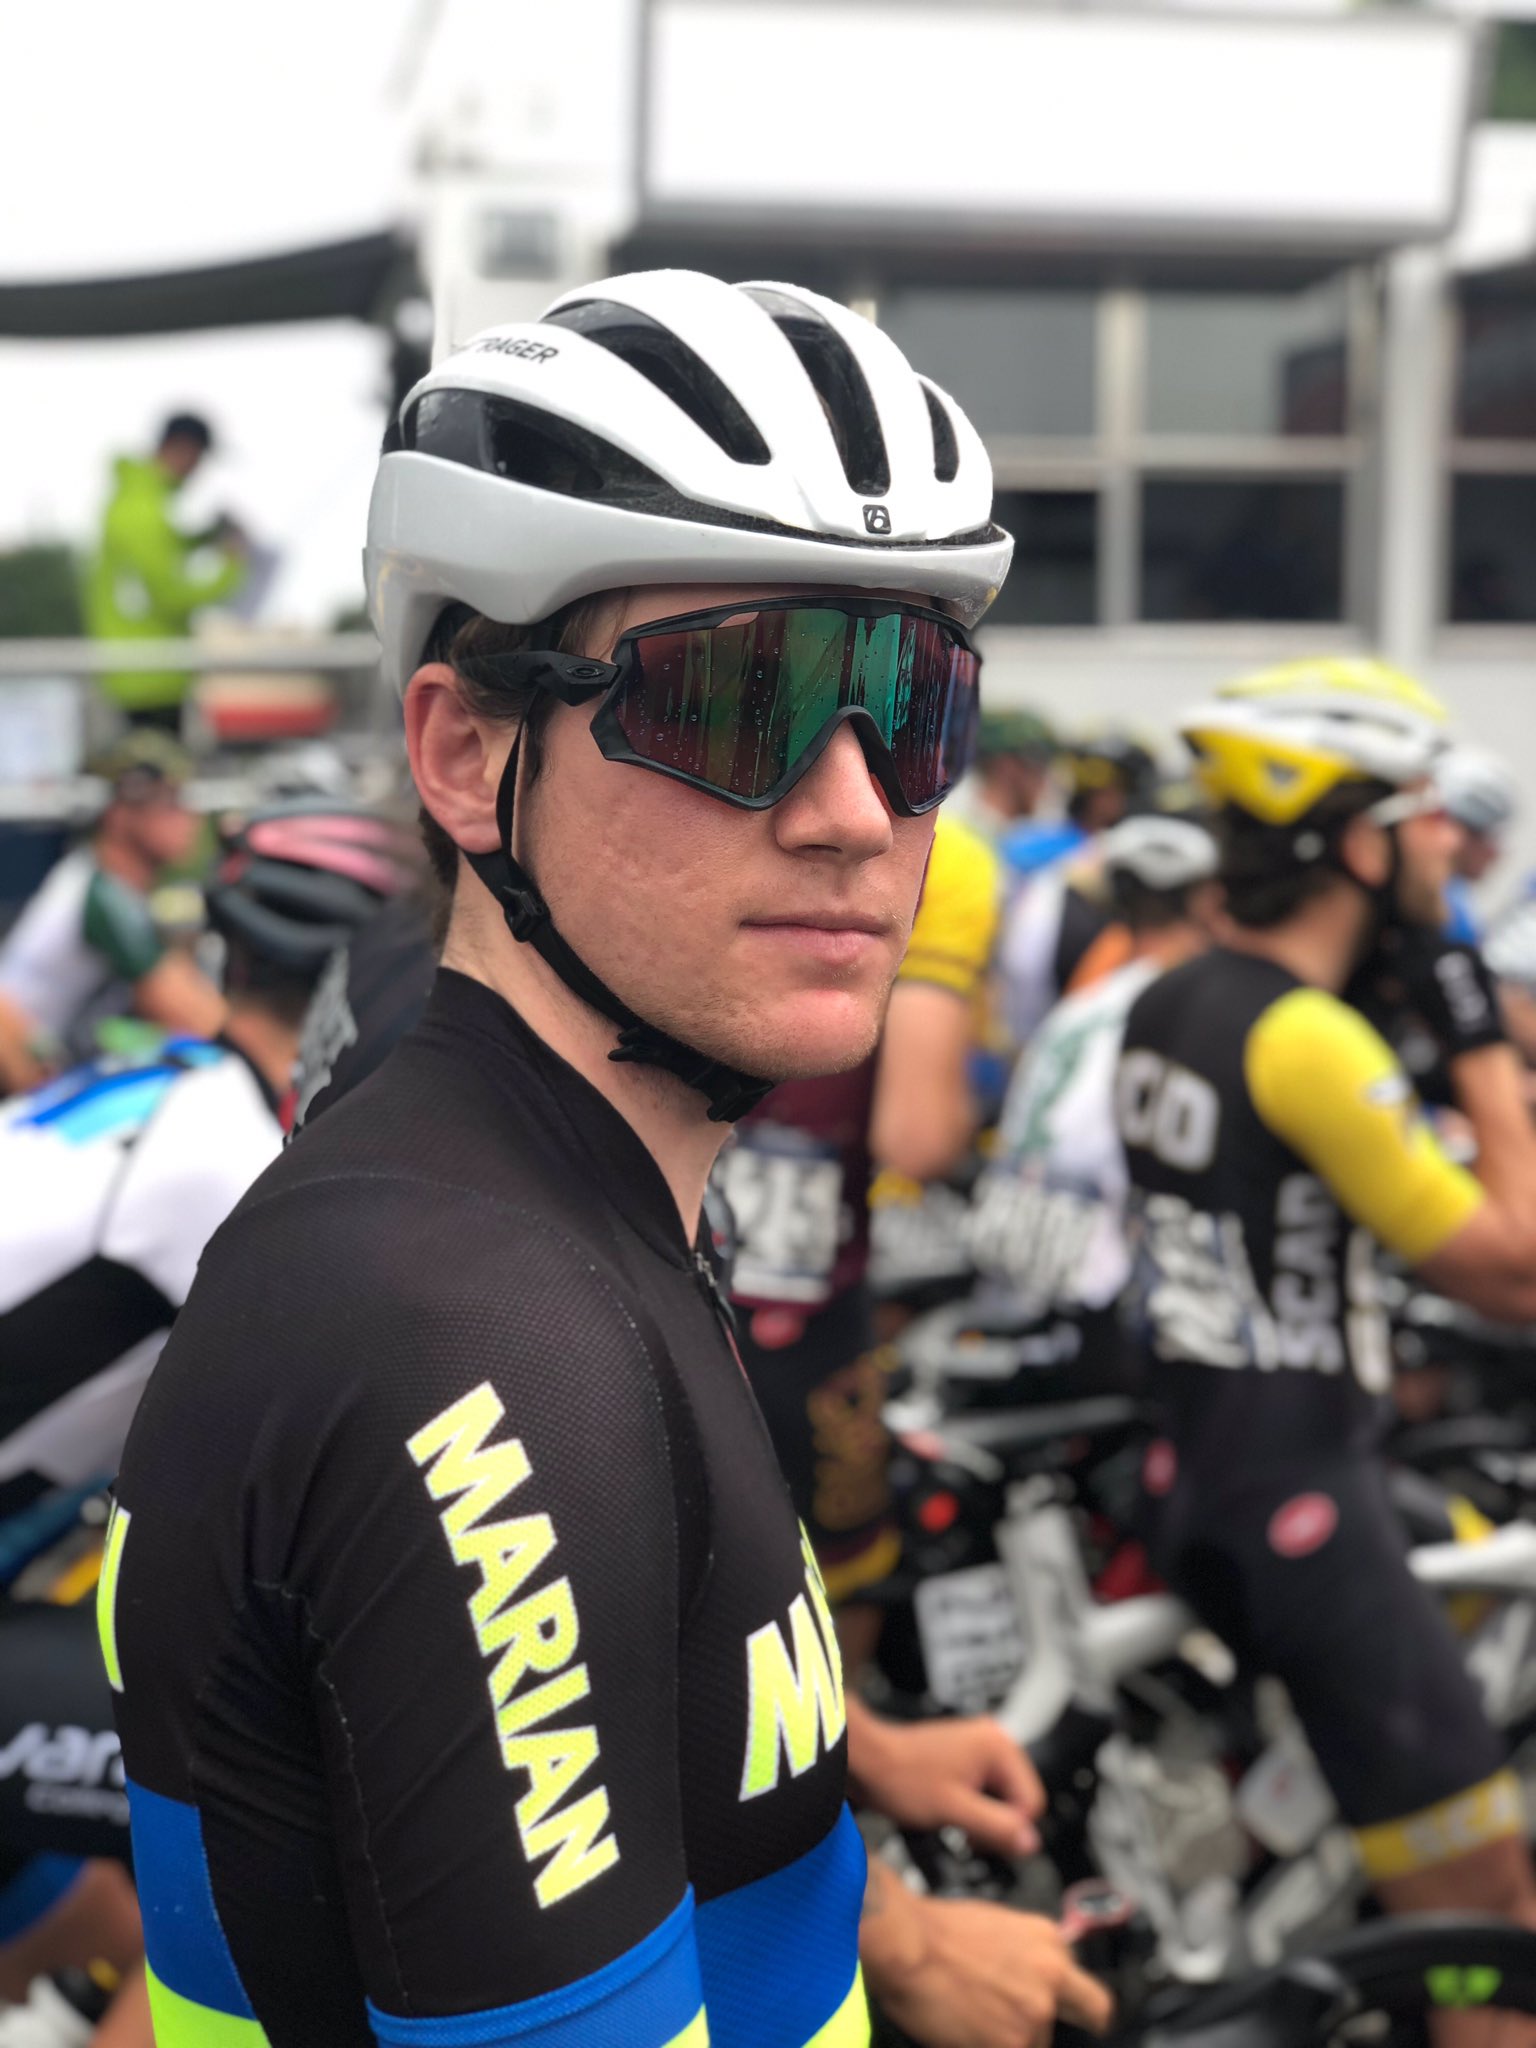 Cade Bickmore on Twitter: "Hey cycling twitter, I lost these shades when they flew off my face in crash in the final turn of the crit yesterday at #CollNats in Augusta.